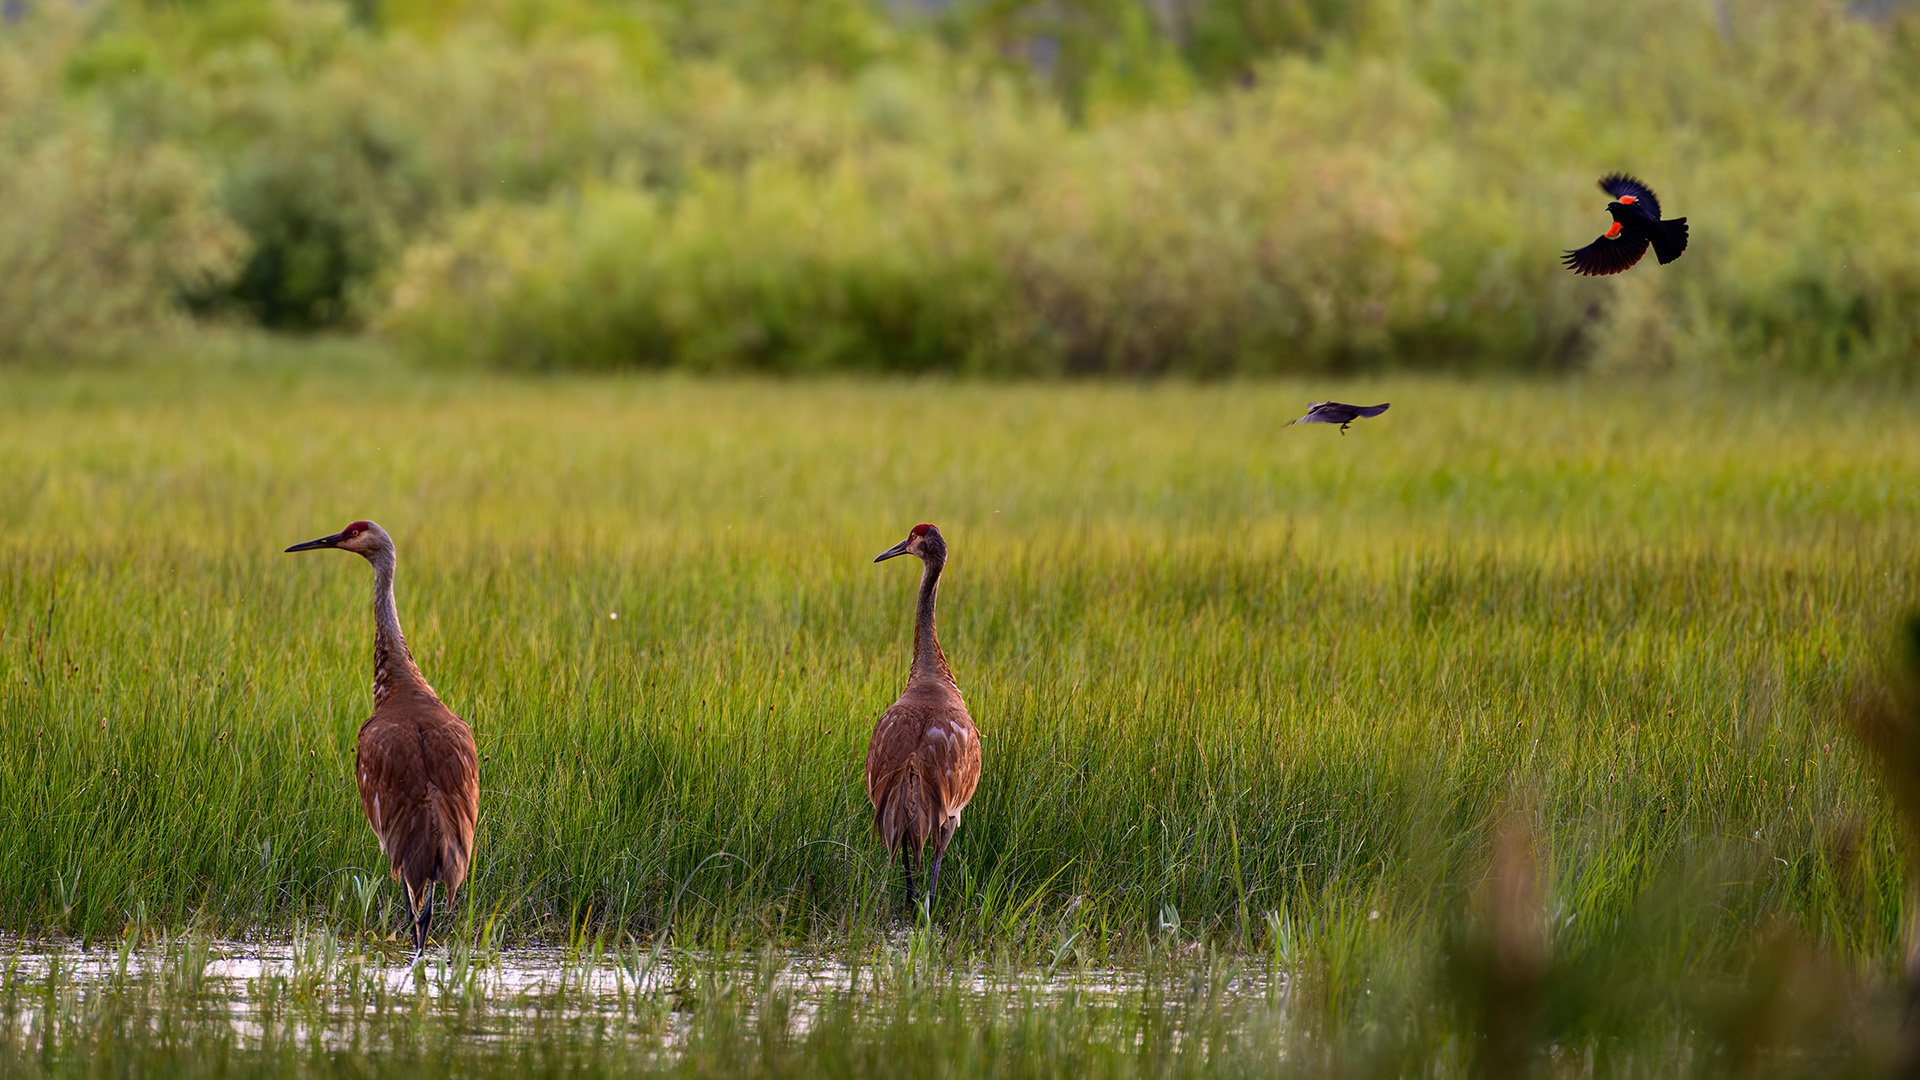 A pair of Sandhill cranes standing in the Upper Truckee Marsh, with red-winged blackbirds flying overhead.